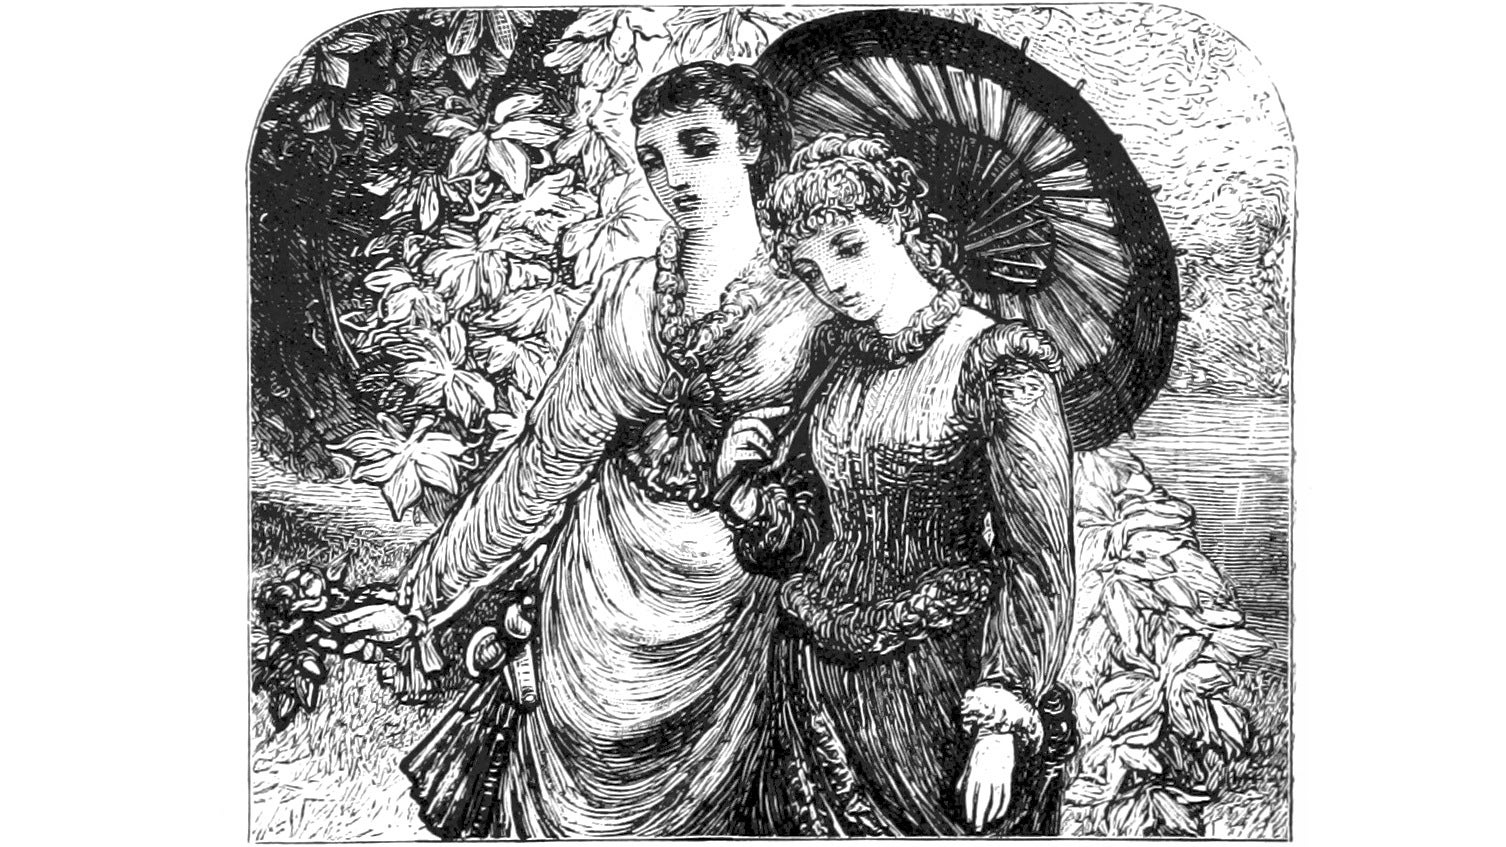 Two Victorian women walking in the woods beneath a parasol in an illustration from 'The dove's nest and other tales'.